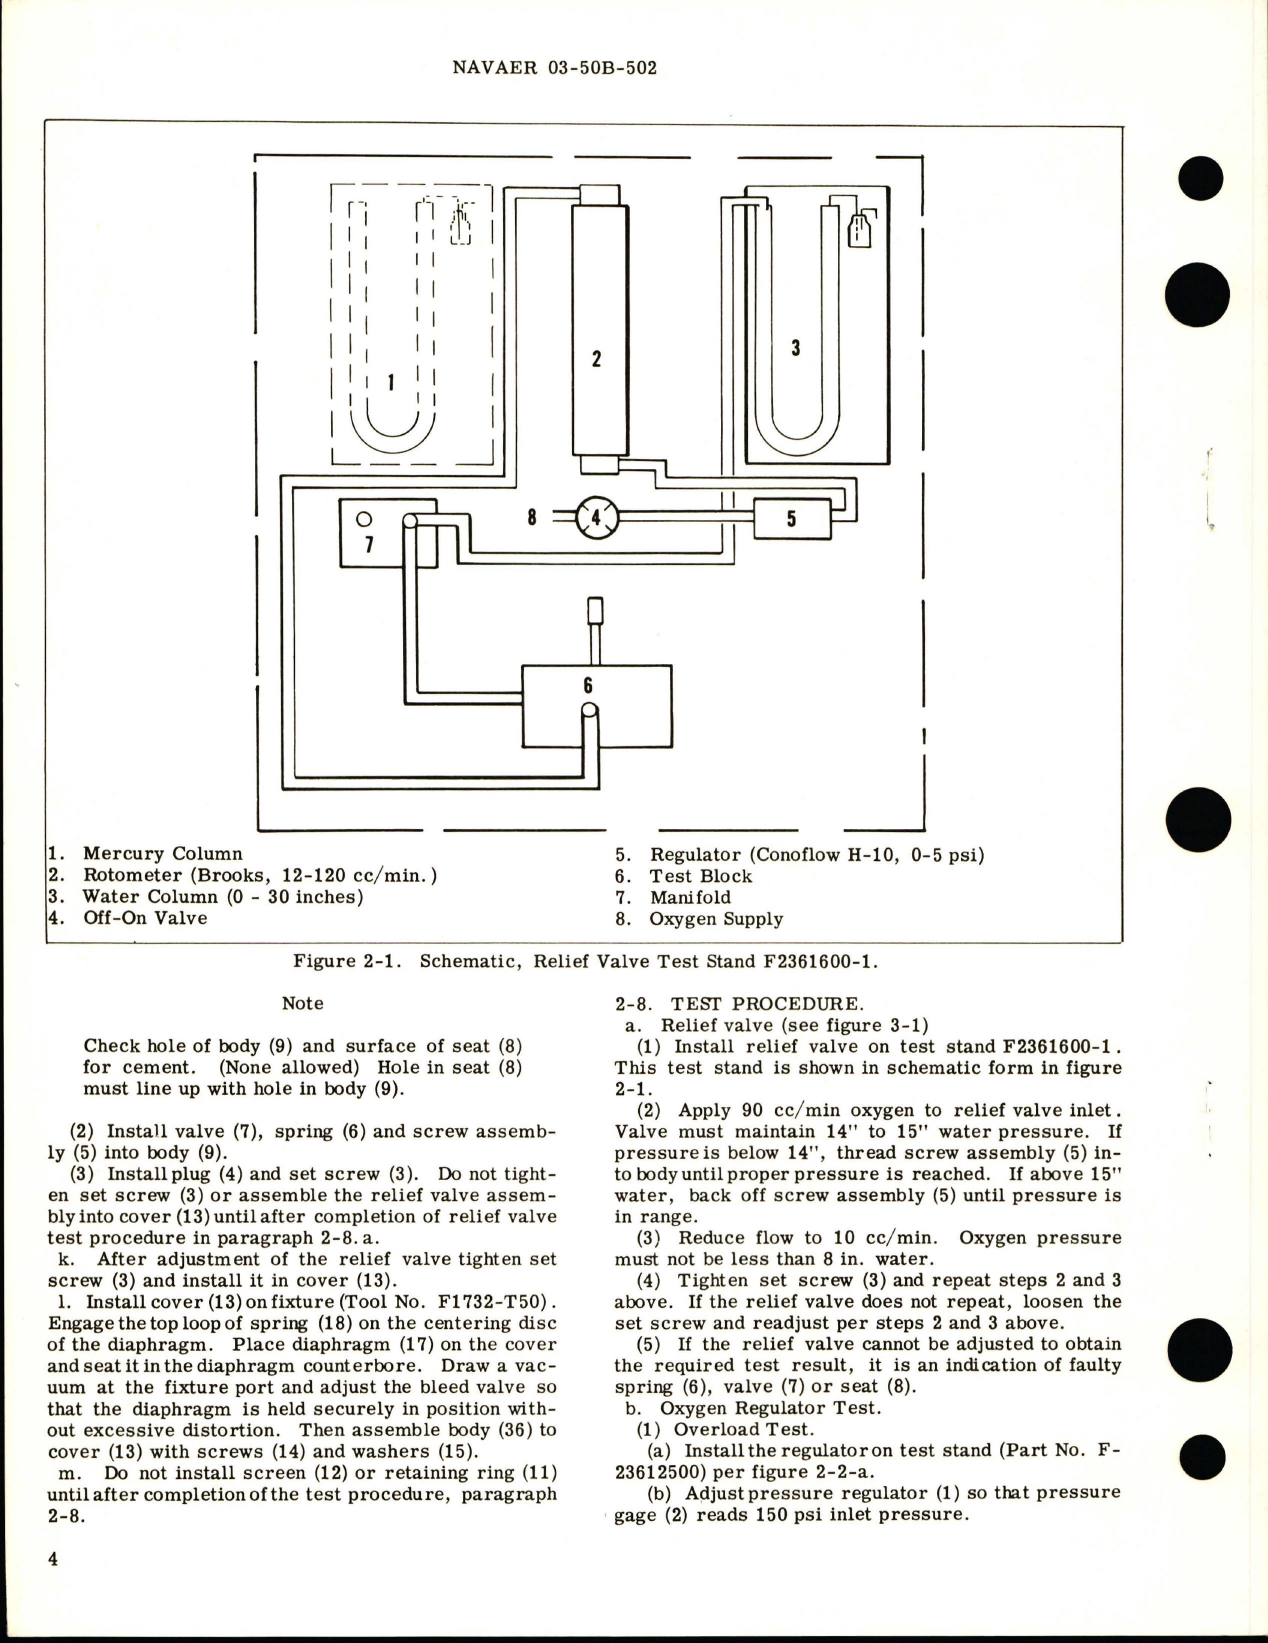 Sample page 6 from AirCorps Library document: Operation, Service, and Overhaul Instructions with Illustrated Parts Breakdown for Automatic Pressure Oxygen Breathing Regulator - Parts F1732, F1732-1, F1732-2, and F1732-3